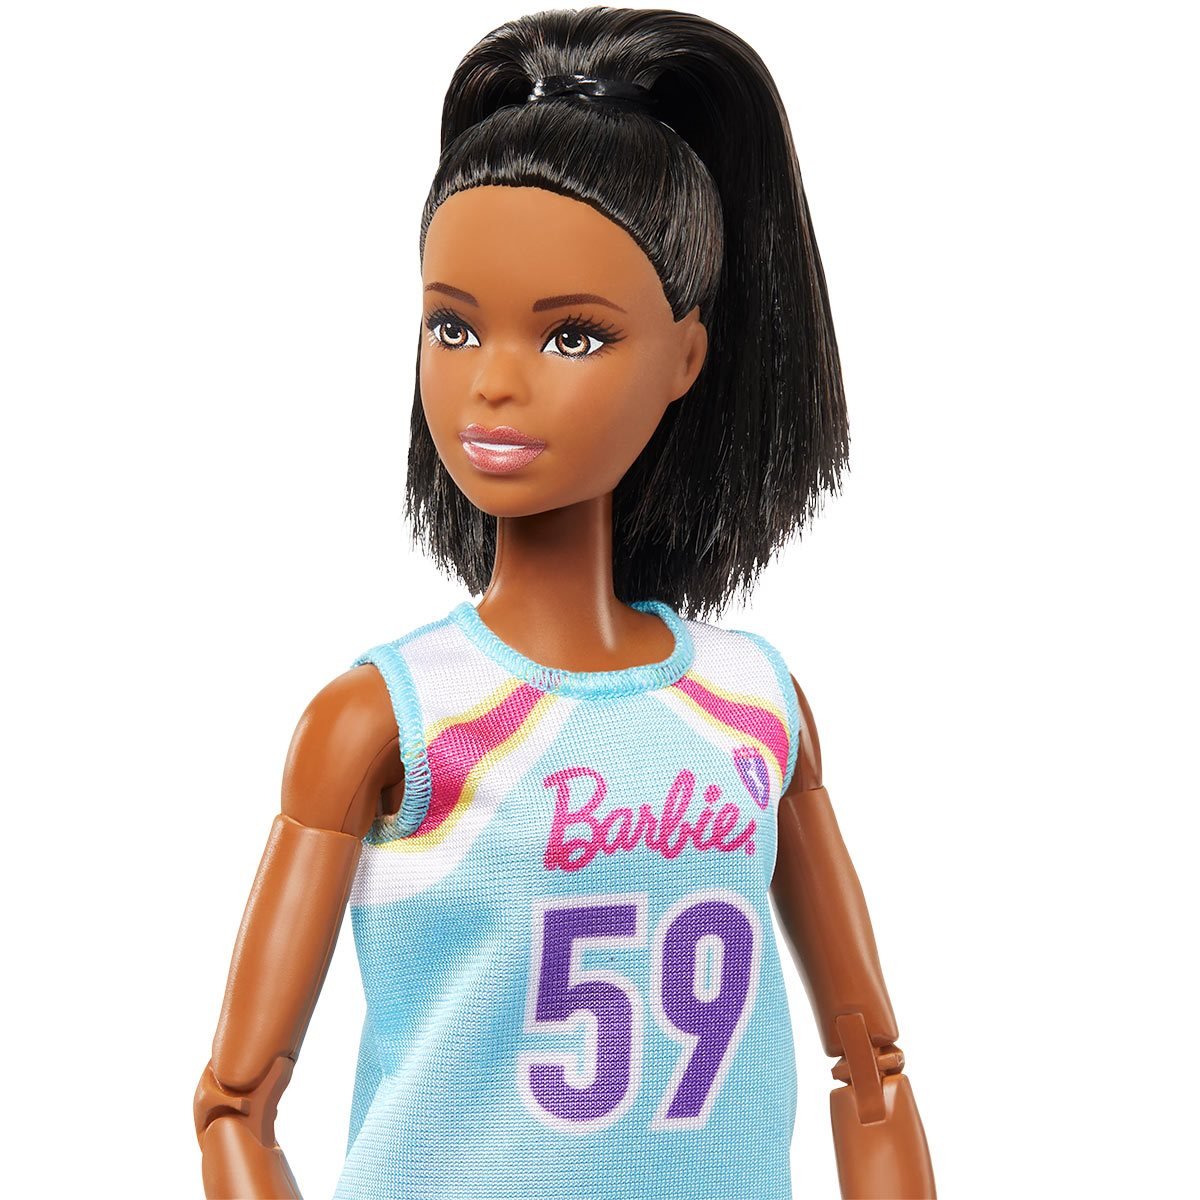  Barbie Made to Move Barbie Doll, Blue Top and Made to Move  Barbie Doll, Pink Top Bundle : Toys & Games